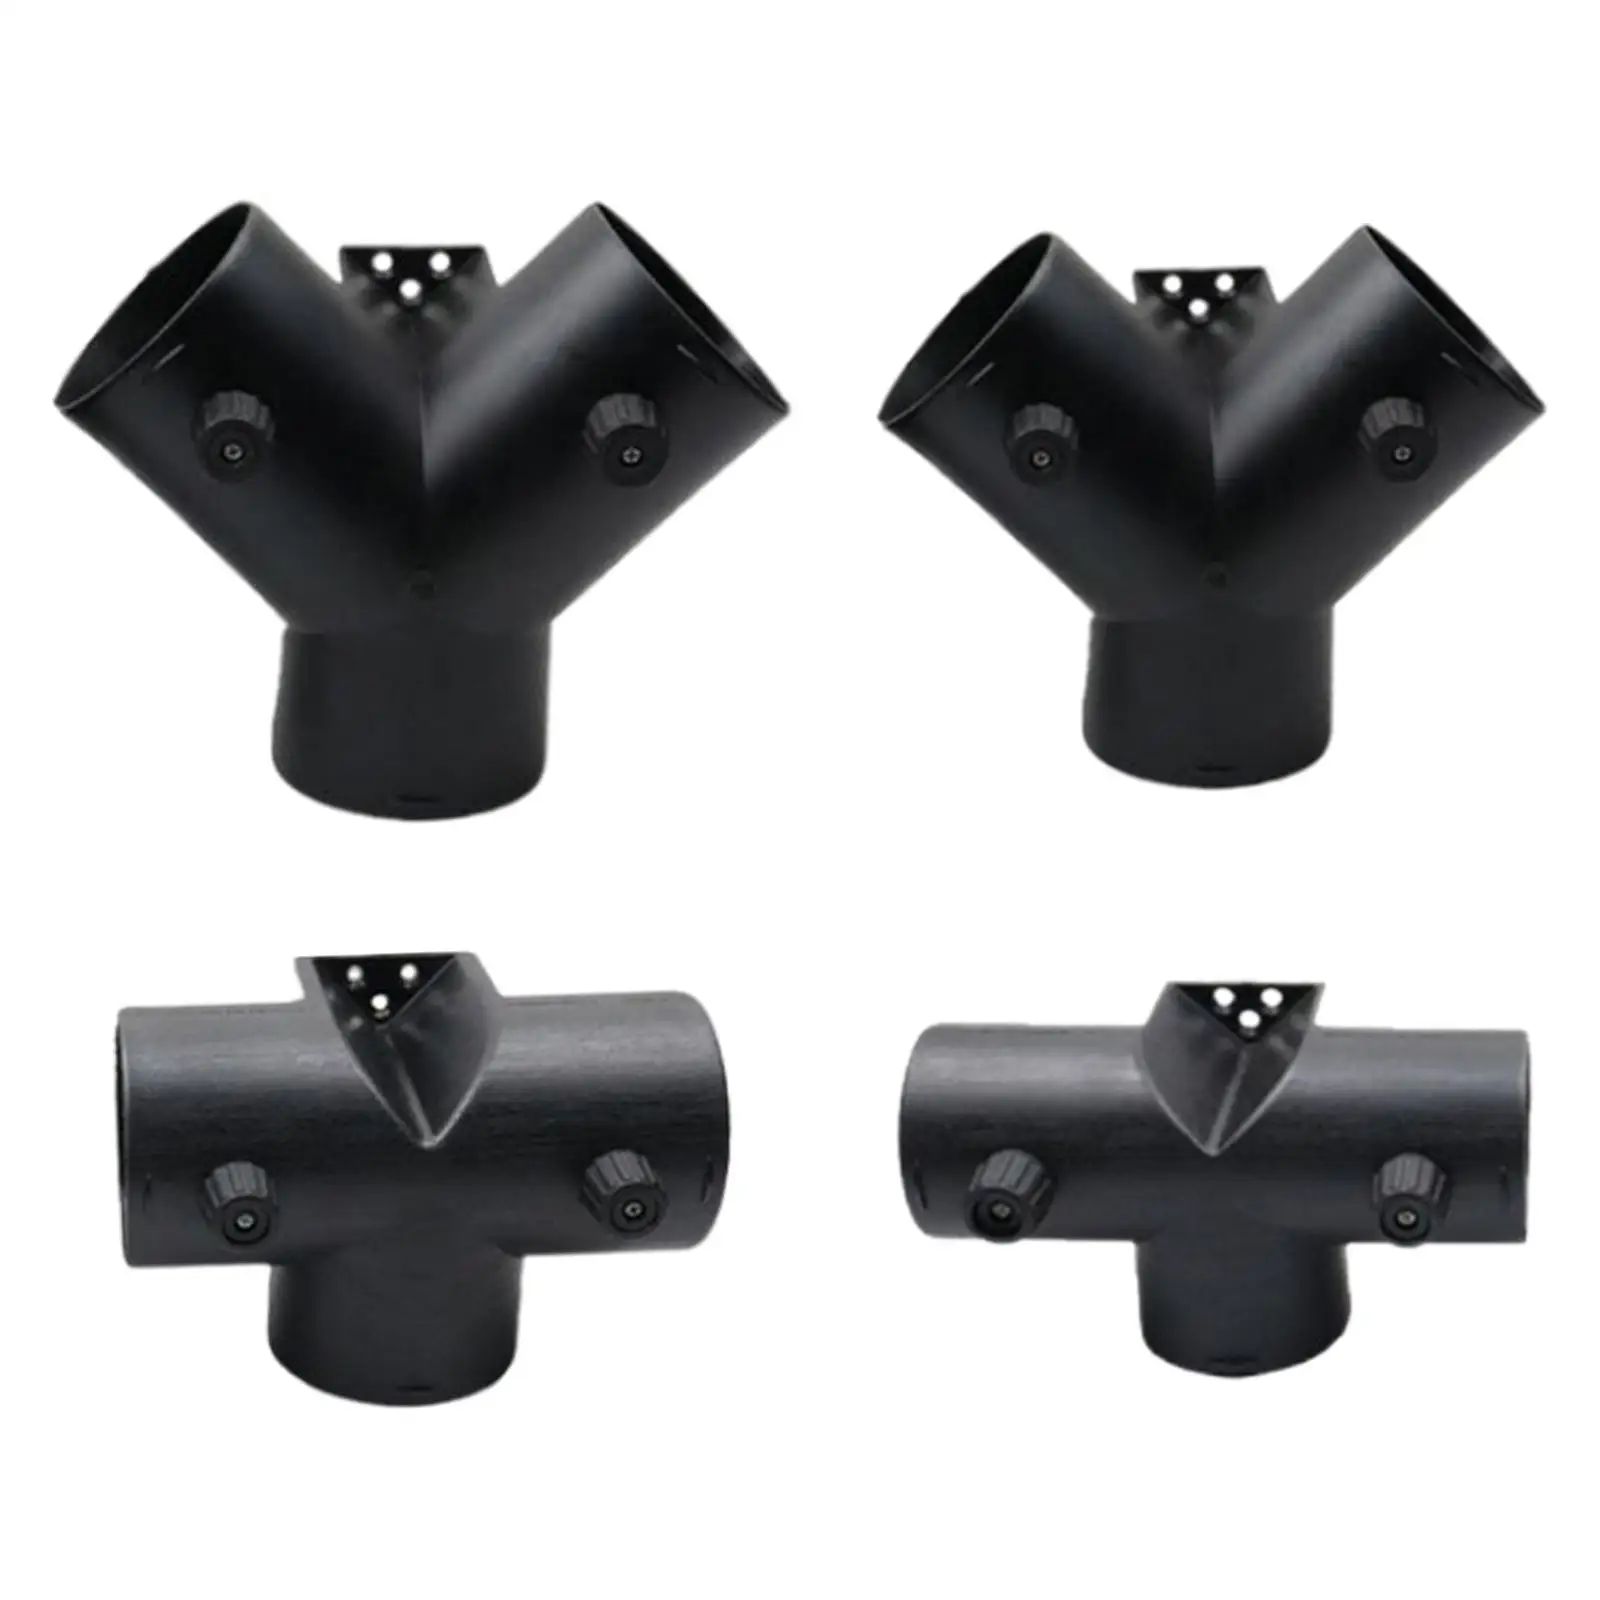 Air Vent Ducting Exhaust Connector Air Conditioning Vent Duct Pipe Connector for Parking Heater Air Control Dual Closable